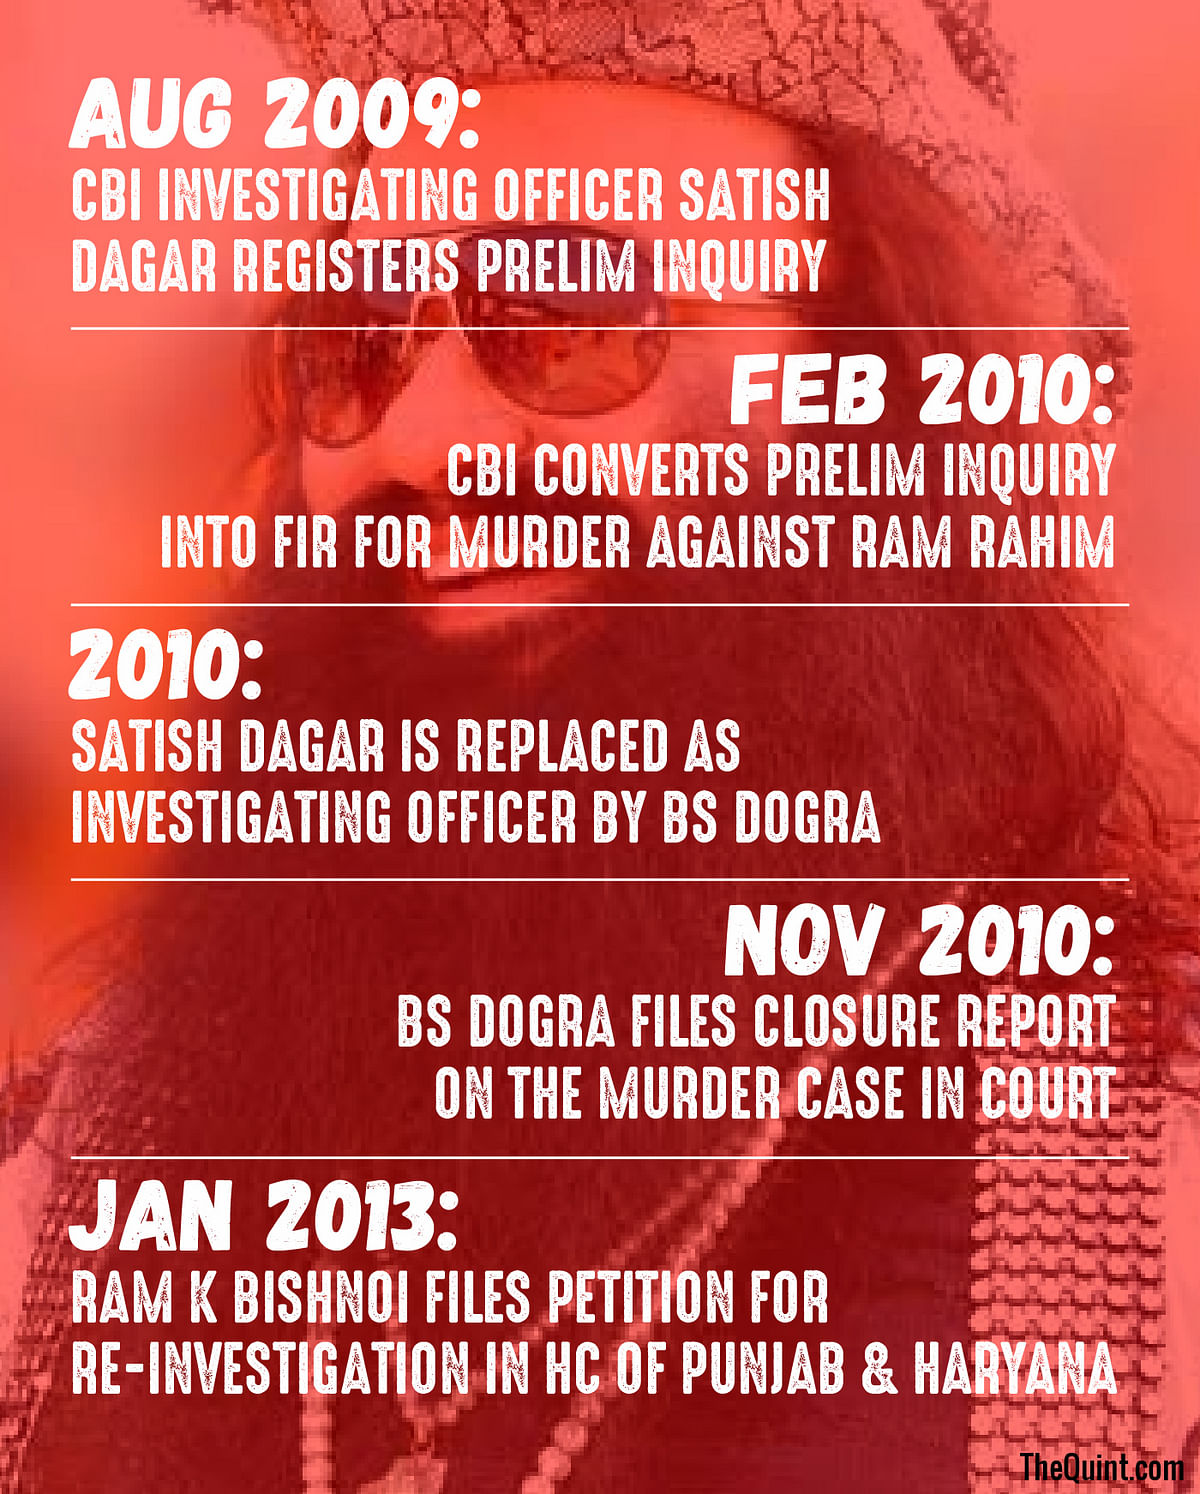 With the initial complaint having come in 1992, the case against Ram Rahim has even reached the CBI, to no avail.